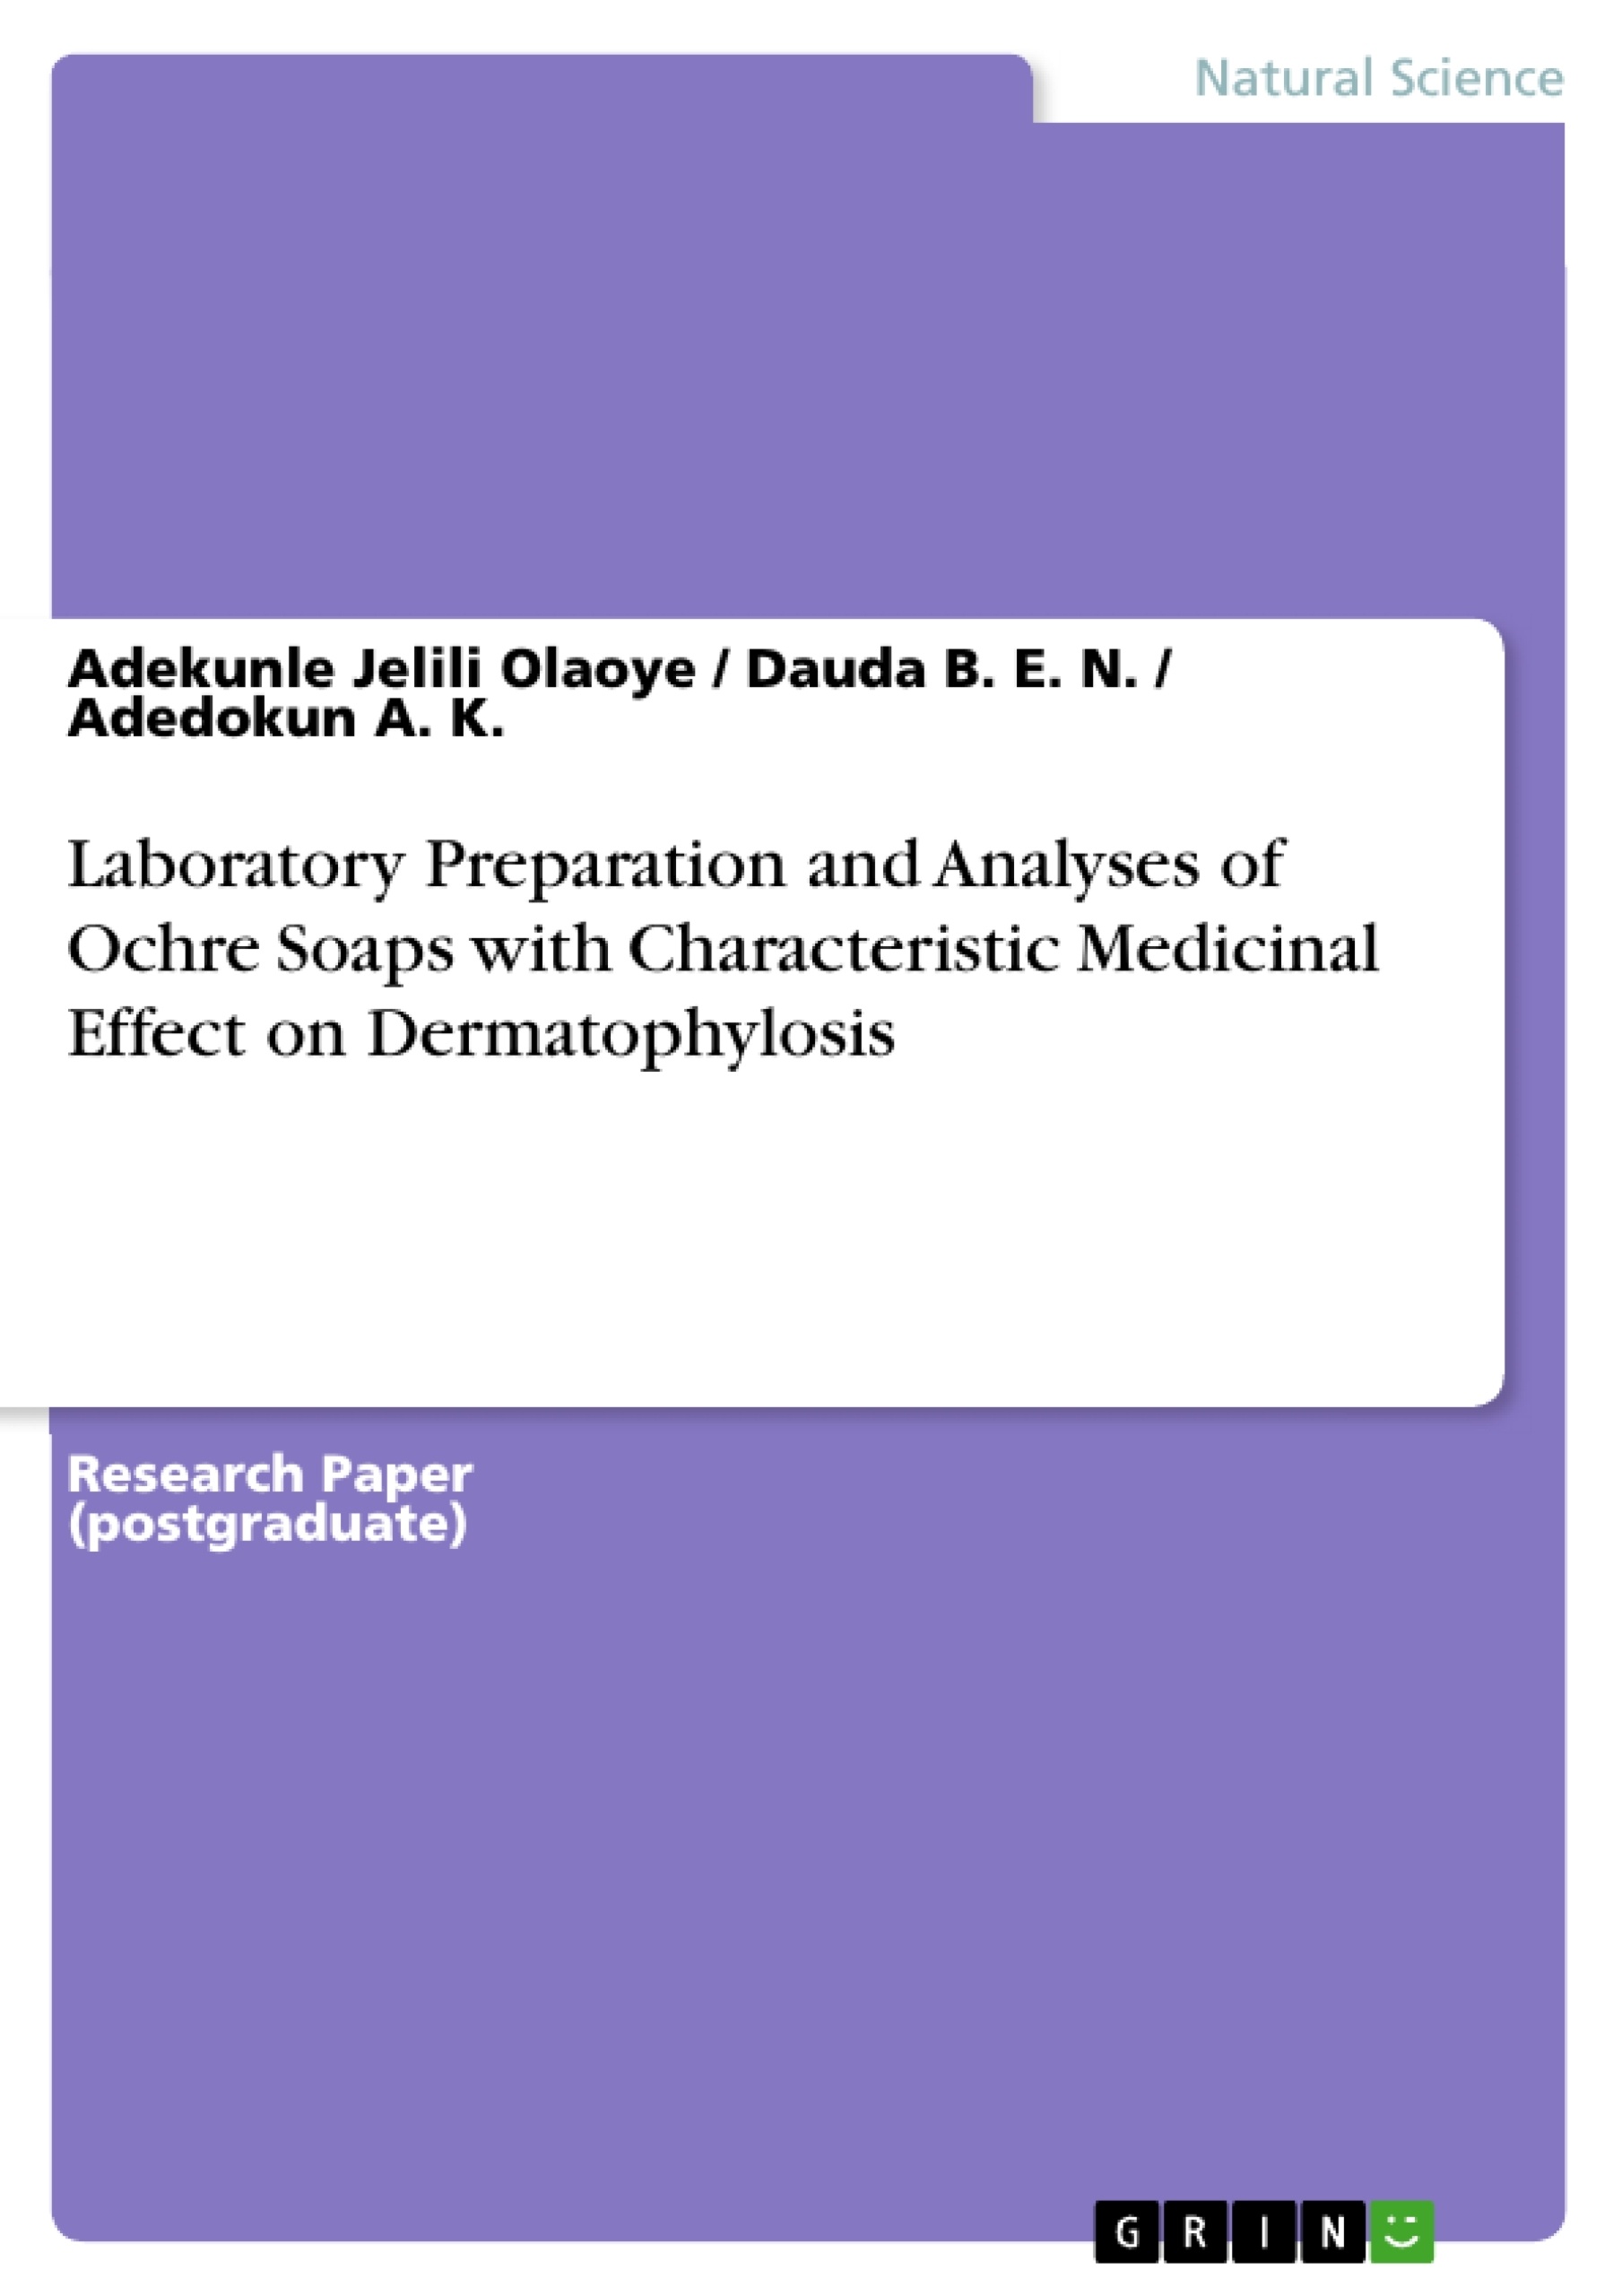 Title: Laboratory Preparation and Analyses of Ochre Soaps with Characteristic Medicinal Effect on Dermatophylosis